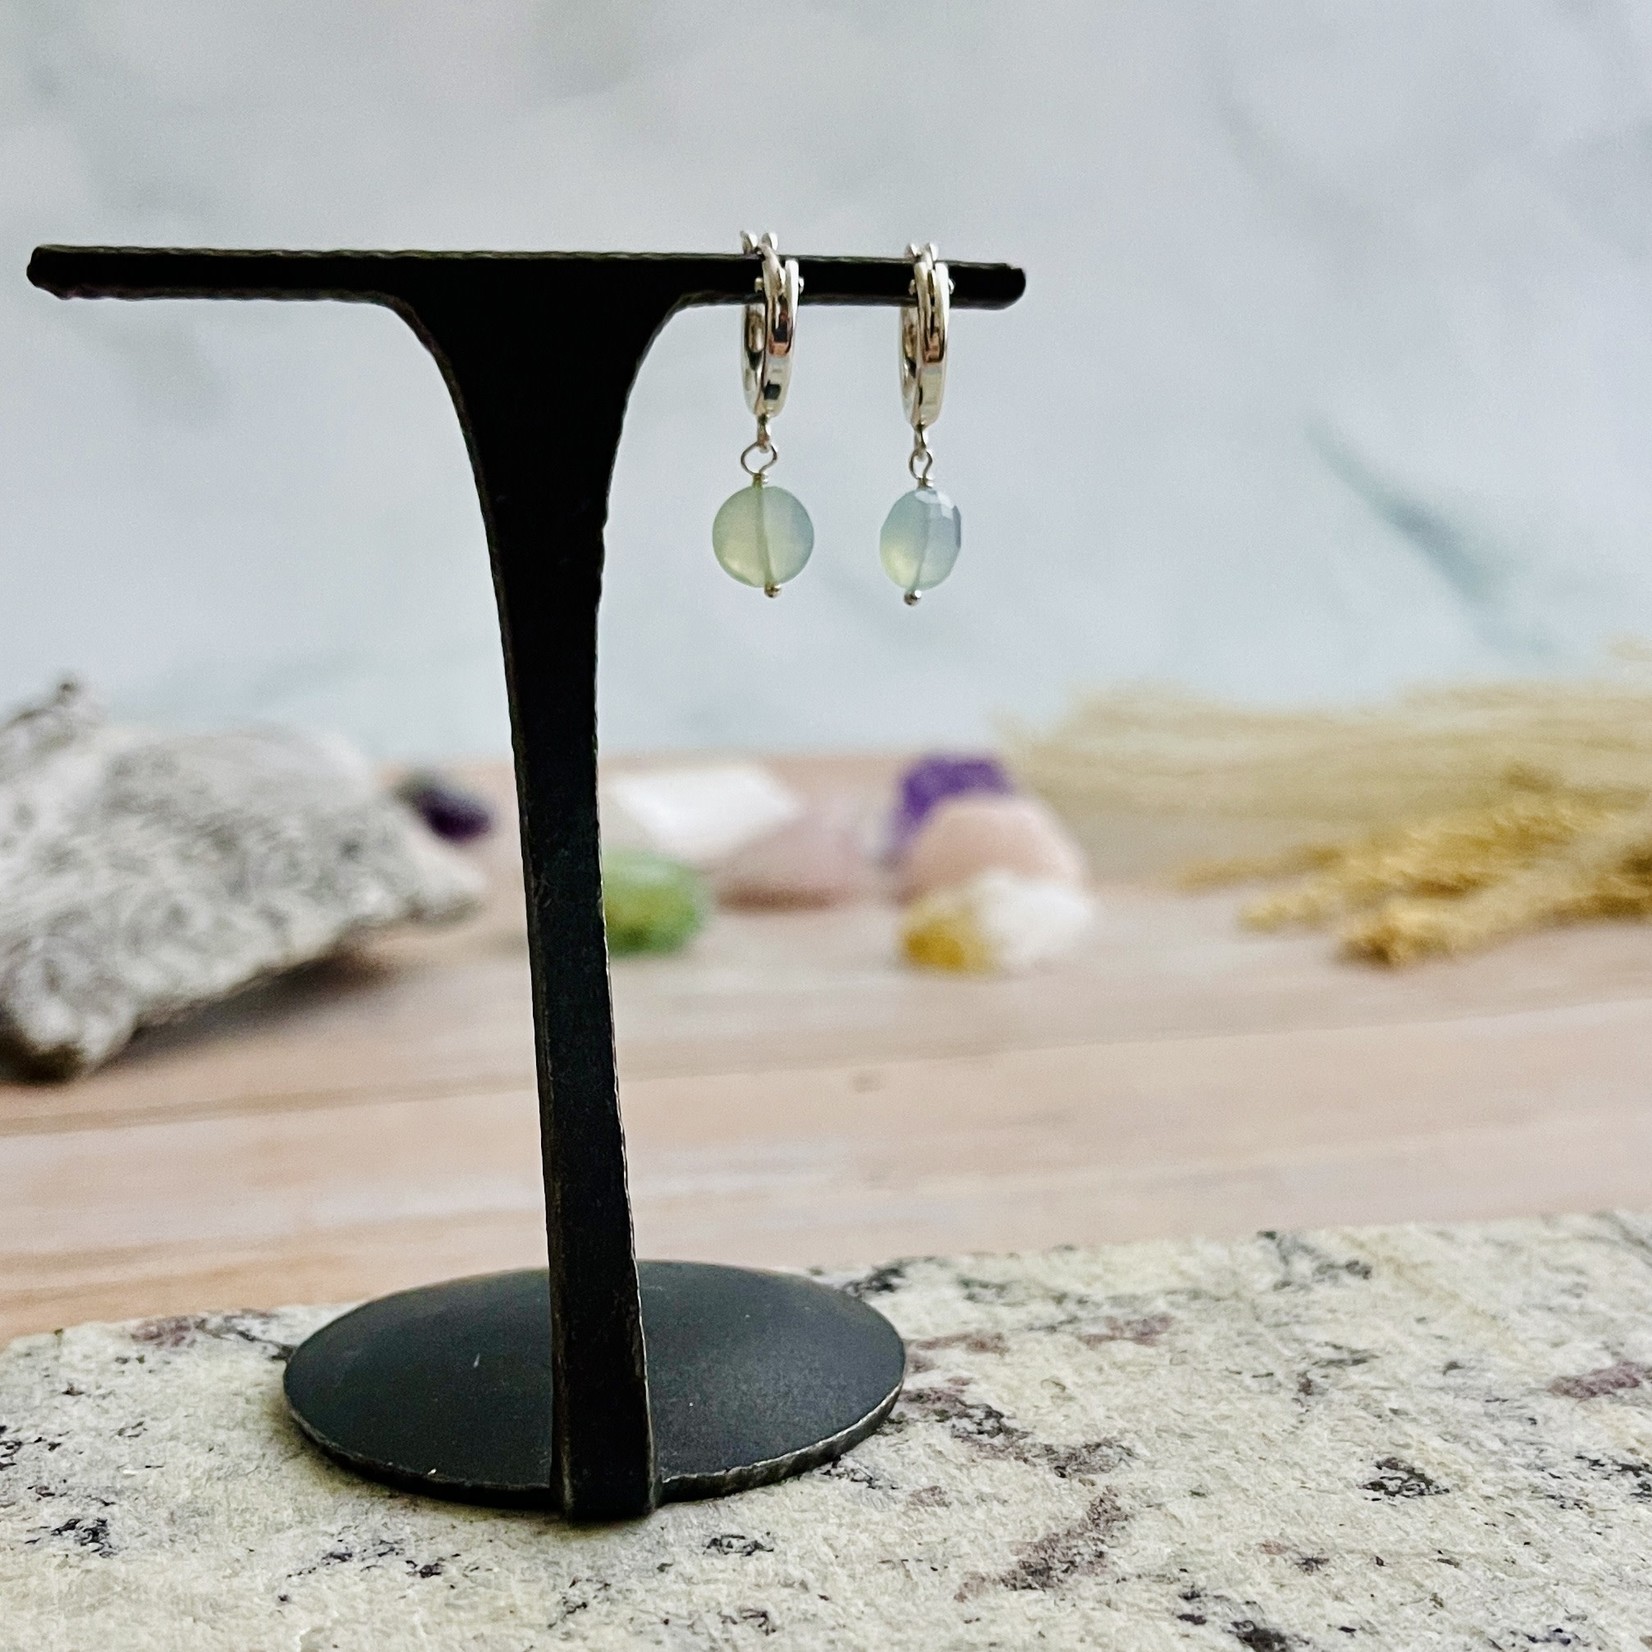 Handmade Silver Earrings with small hoop, chalcedony coin